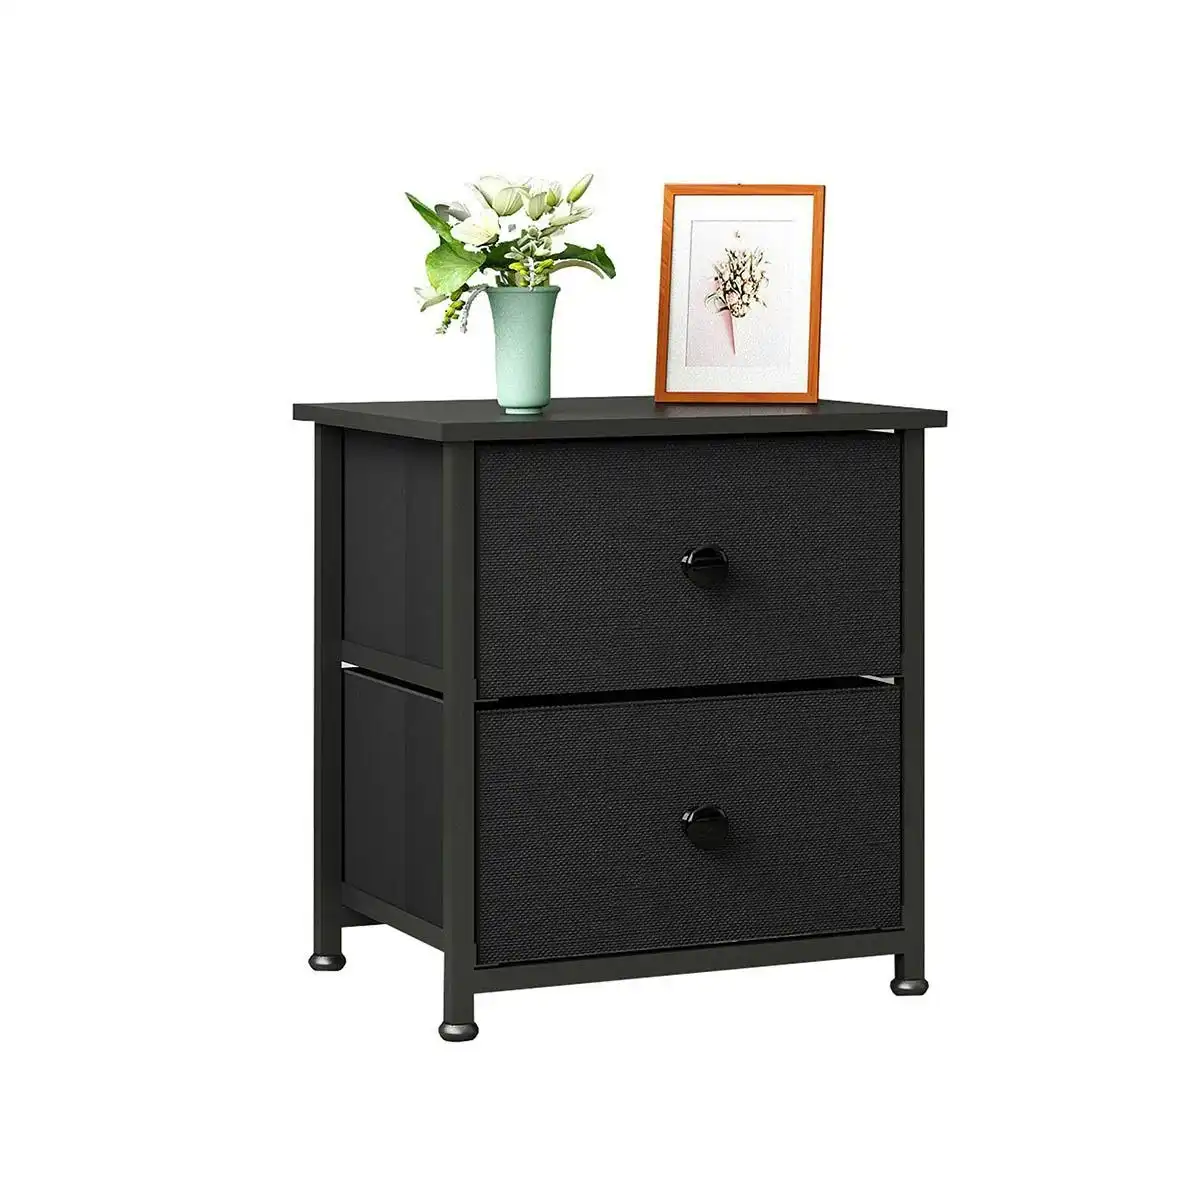 Ausway 2PCS Bedside Table Chest of 2 Drawers Bedroom Furniture Side Lamp Dresser Nightstand Black Sofa End Living Room Cabinet